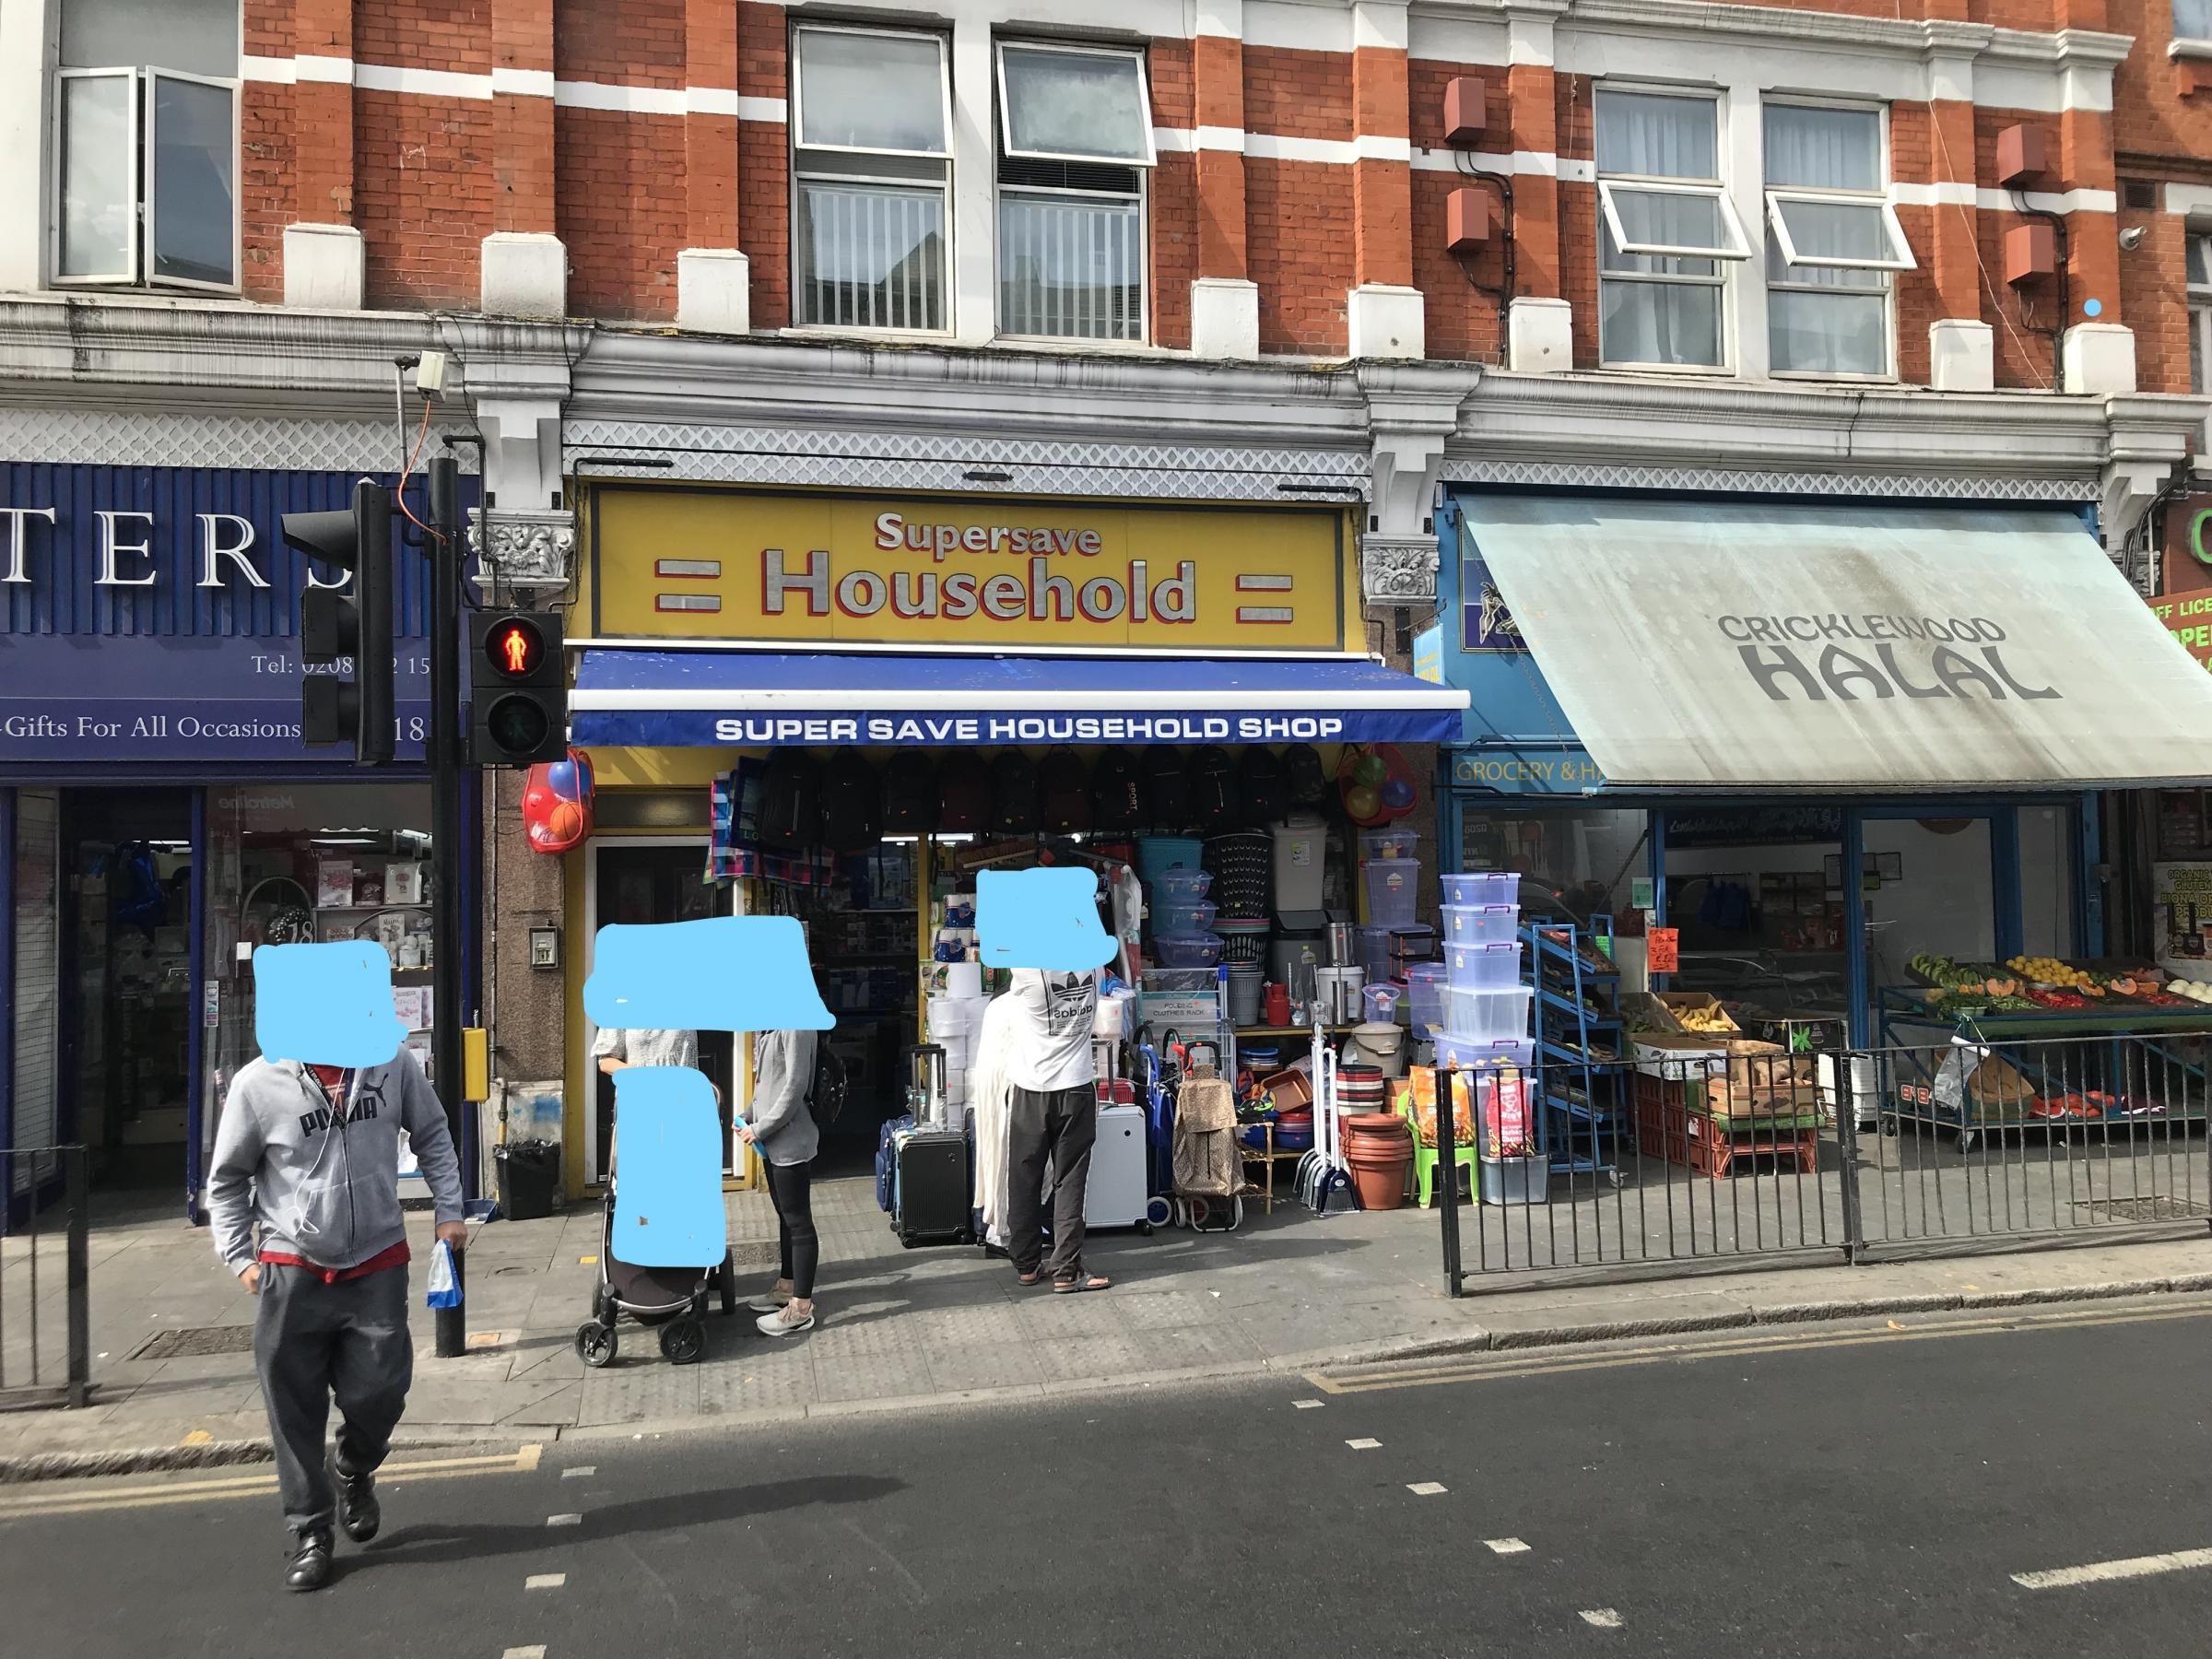 Supersave Household in Cricklewood. The shop was fined more than £3,000 for selling a knife to underage teenagers. Image received by Brent Council. Permission to use with all LDRS partners